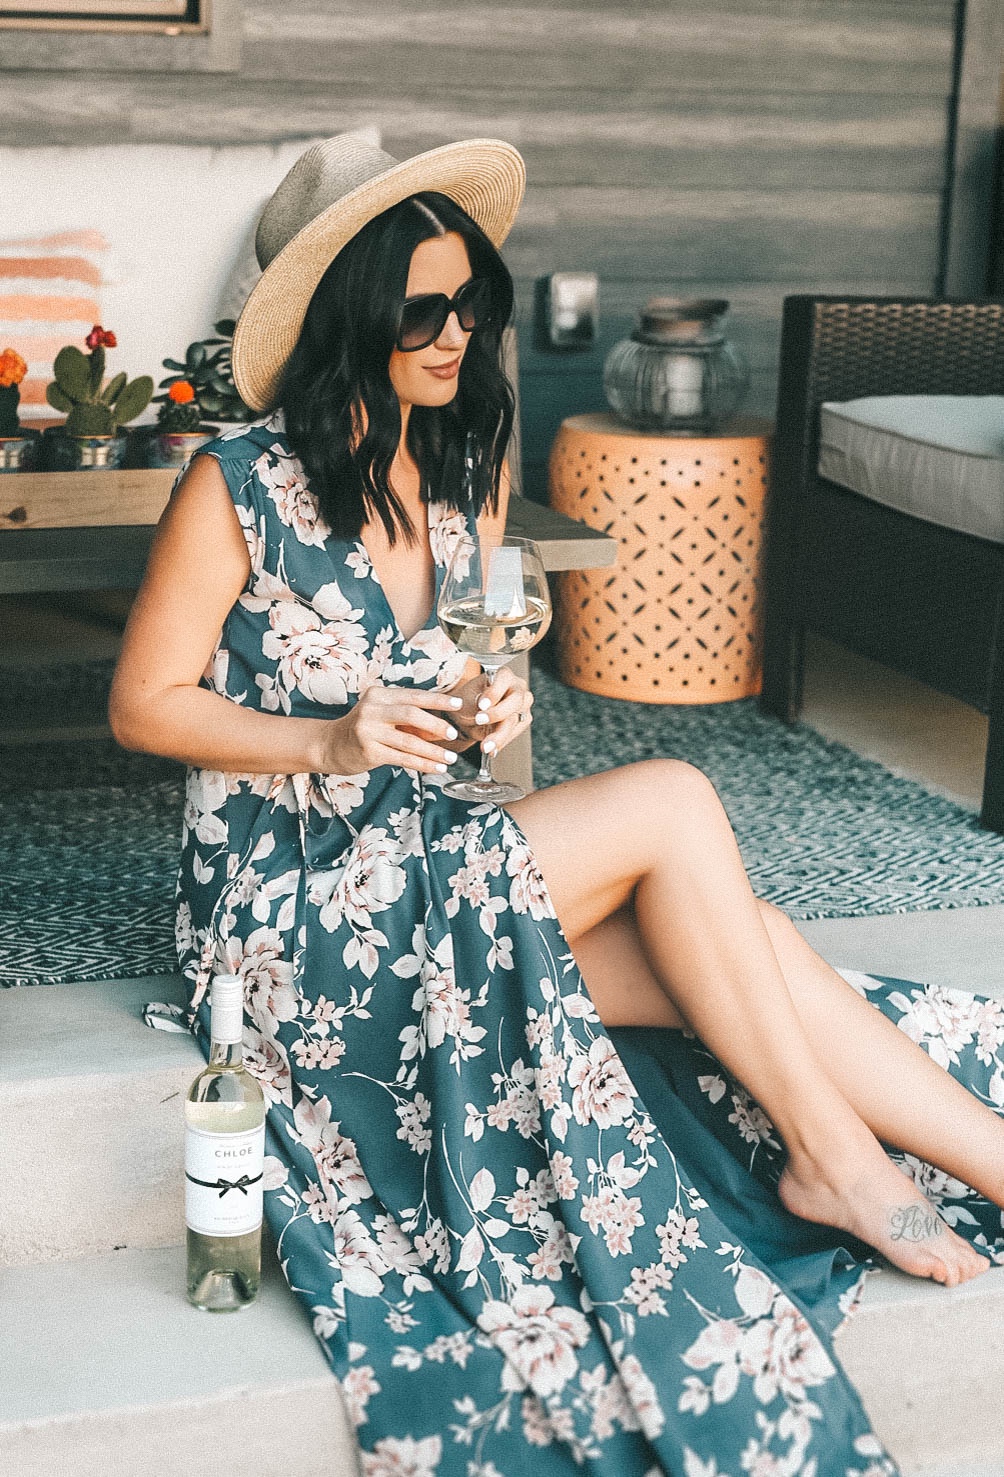 Celebrating Women in Film with Chloe Wine Collection by popular Austin life and style blog, Dressed to Kill: image of a woman sitting outside on her patio next to a bottle of Chloe pinot grigio wine and holding a wine glass in her hand that's half full with the same wine.